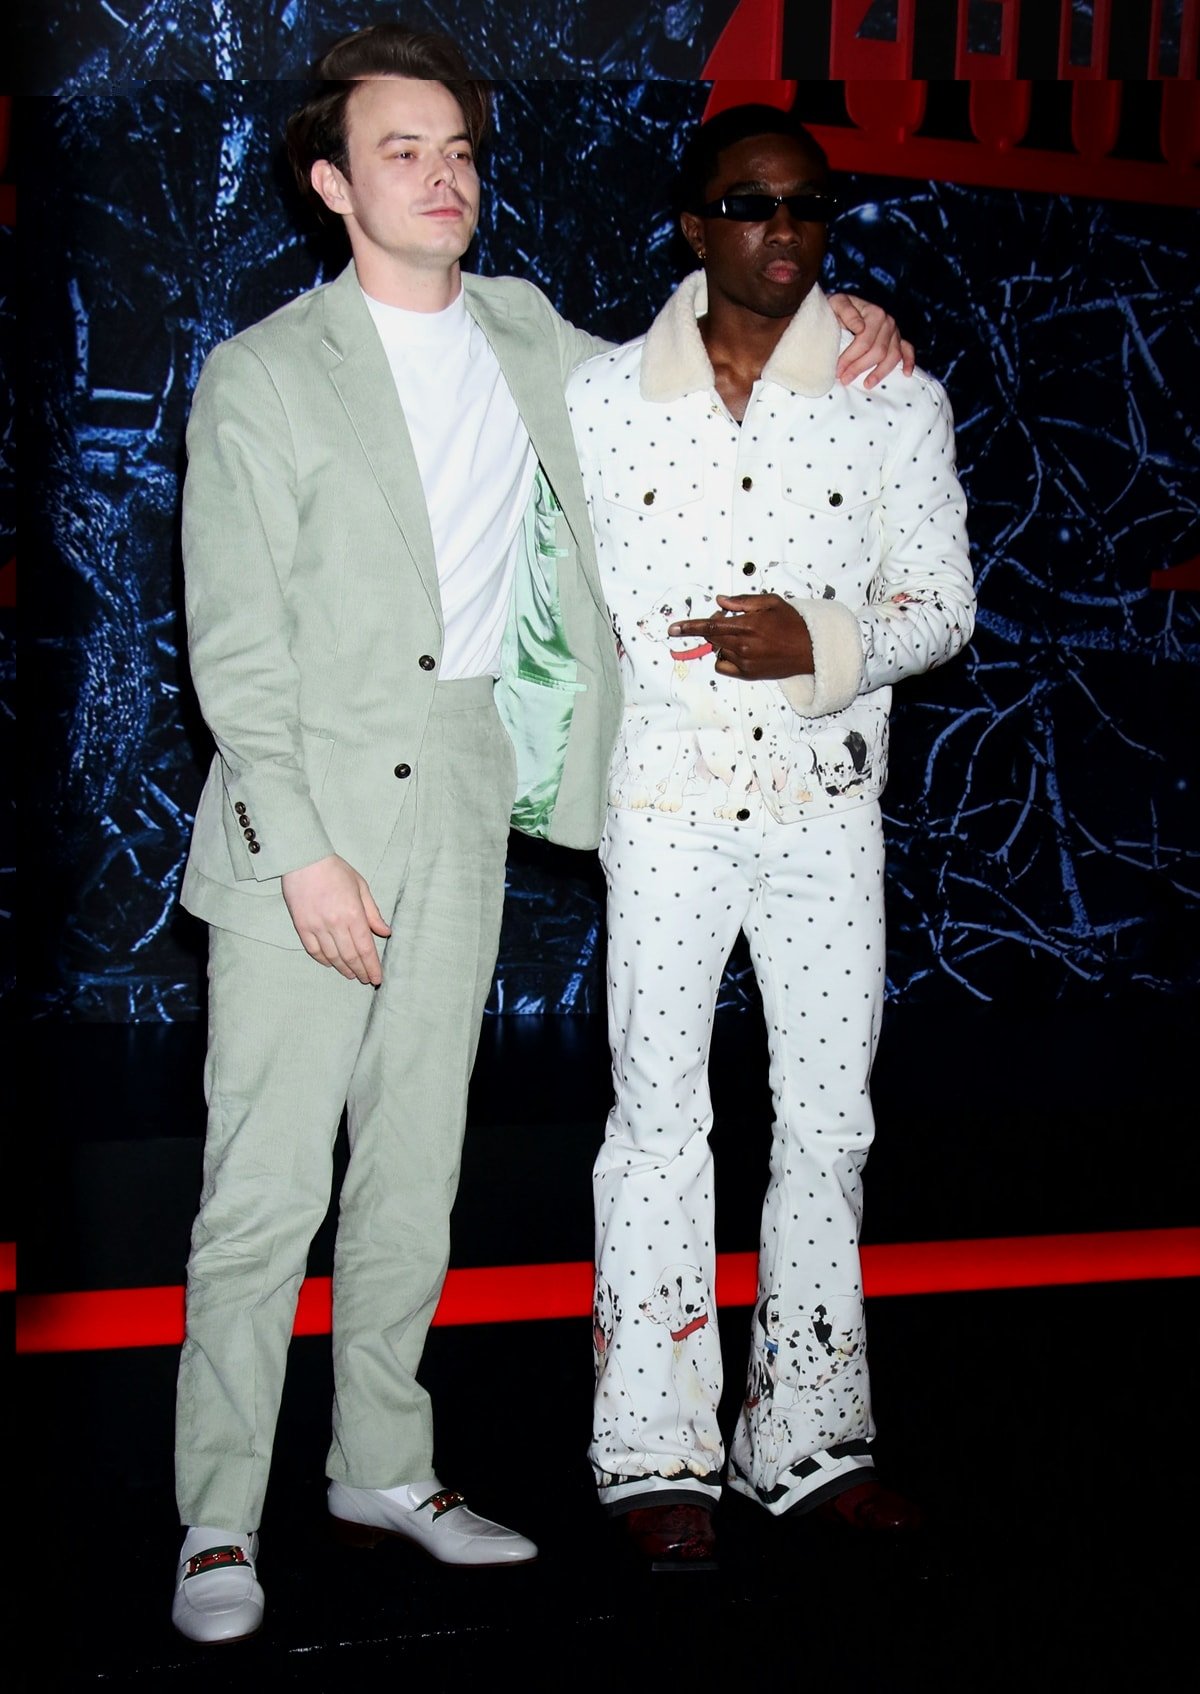 Charlie Heaton in a green suit with Gucci loafers and Caleb McLaughlin in a Dalmatian-themed Casablanca suit at Netflix's "Stranger Things" Season 4 New York Premiere